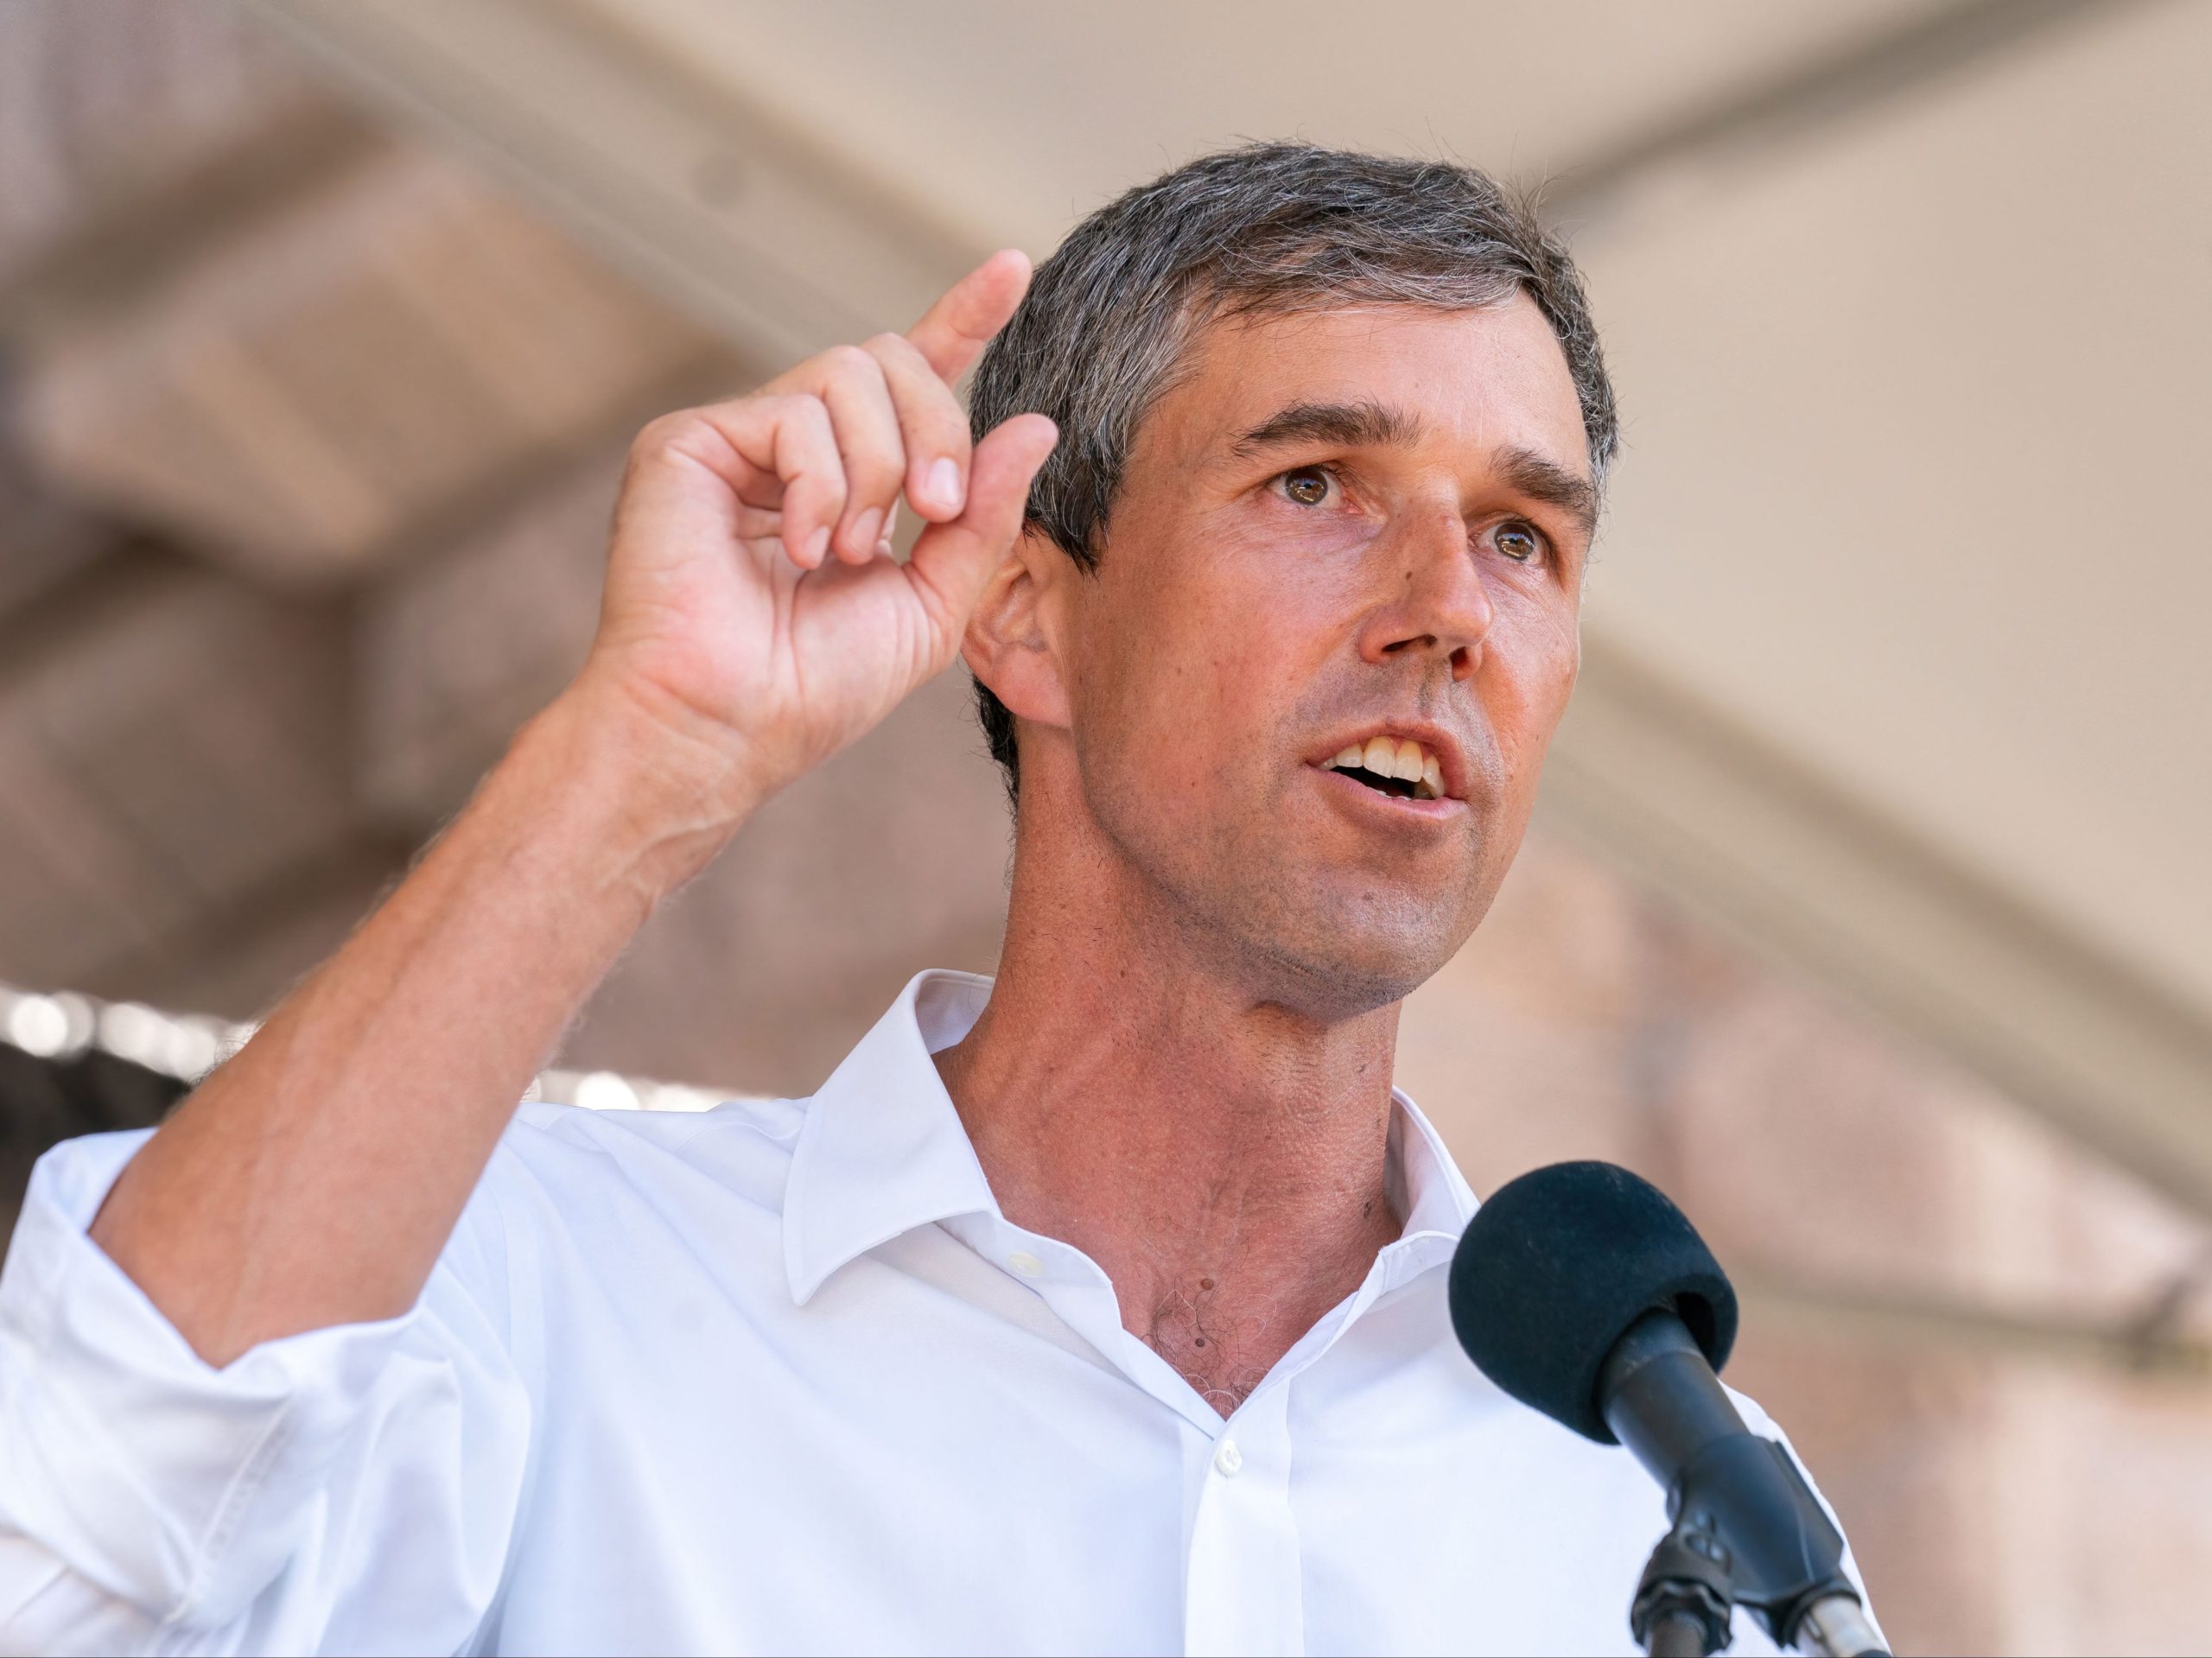 Beto O’Rourke just announced a run for Texas governor – here’s how people reacted